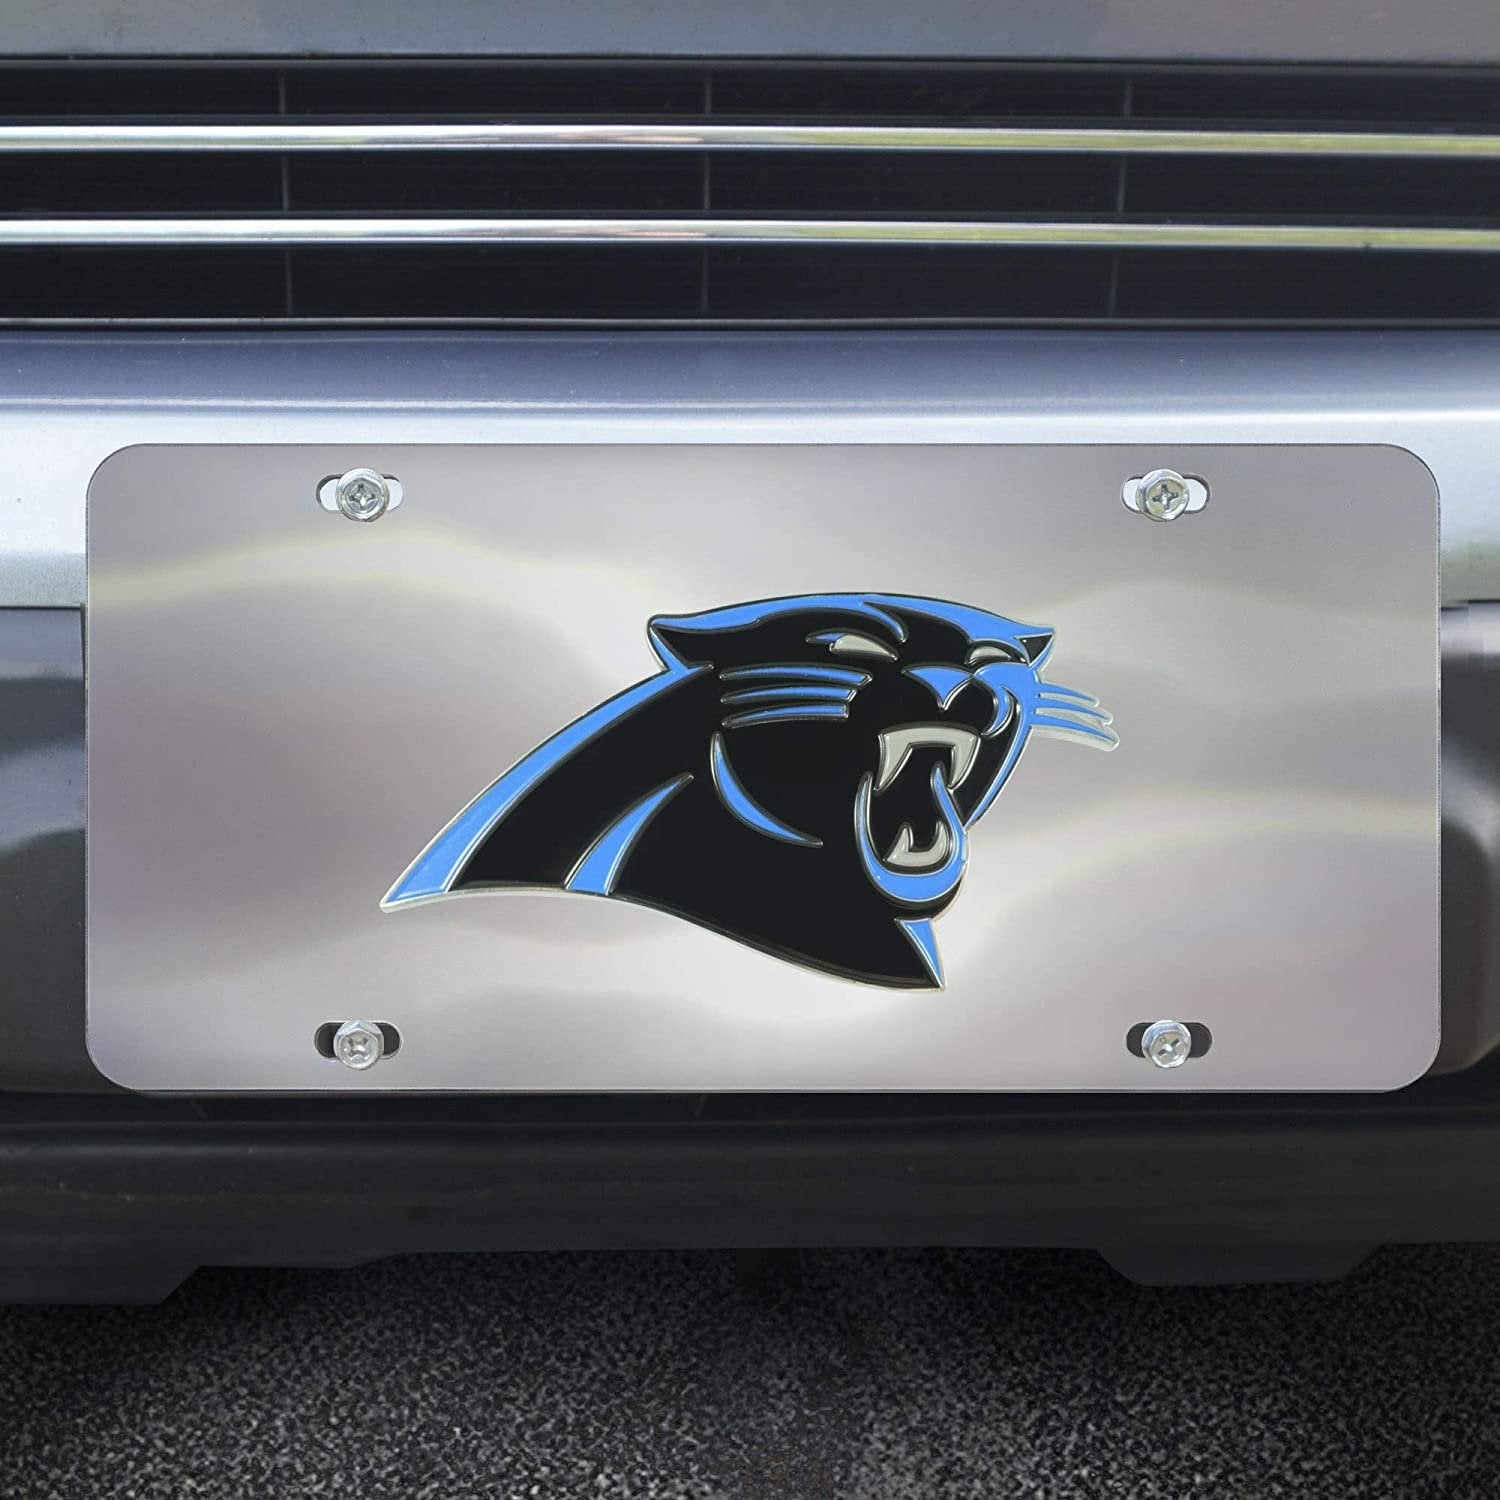 Carolina Panthers License Plate Tag, Premium Stainless Steel Diecast, Chrome, Raised Solid Metal Color Emblem, 6x12 Inch